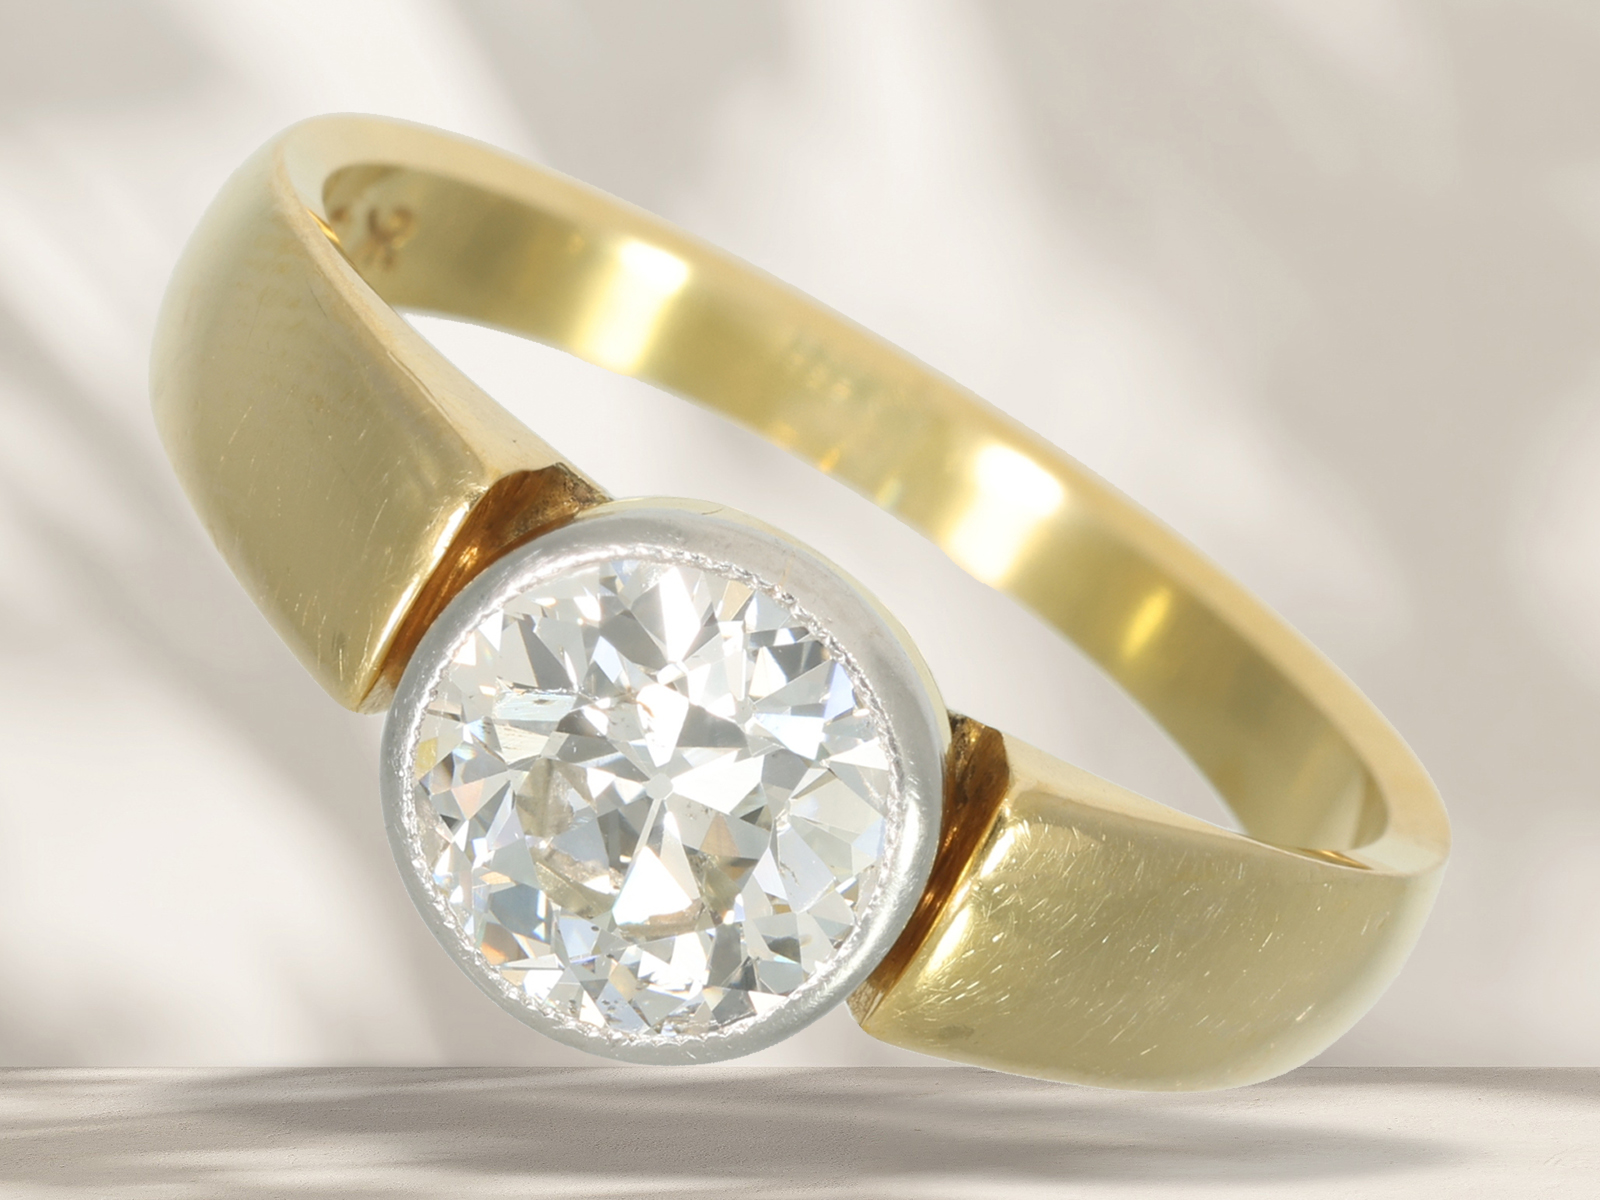 Ring: vintage solitaire diamond gold ring, Old European cut diamond of approx. 1.5ct